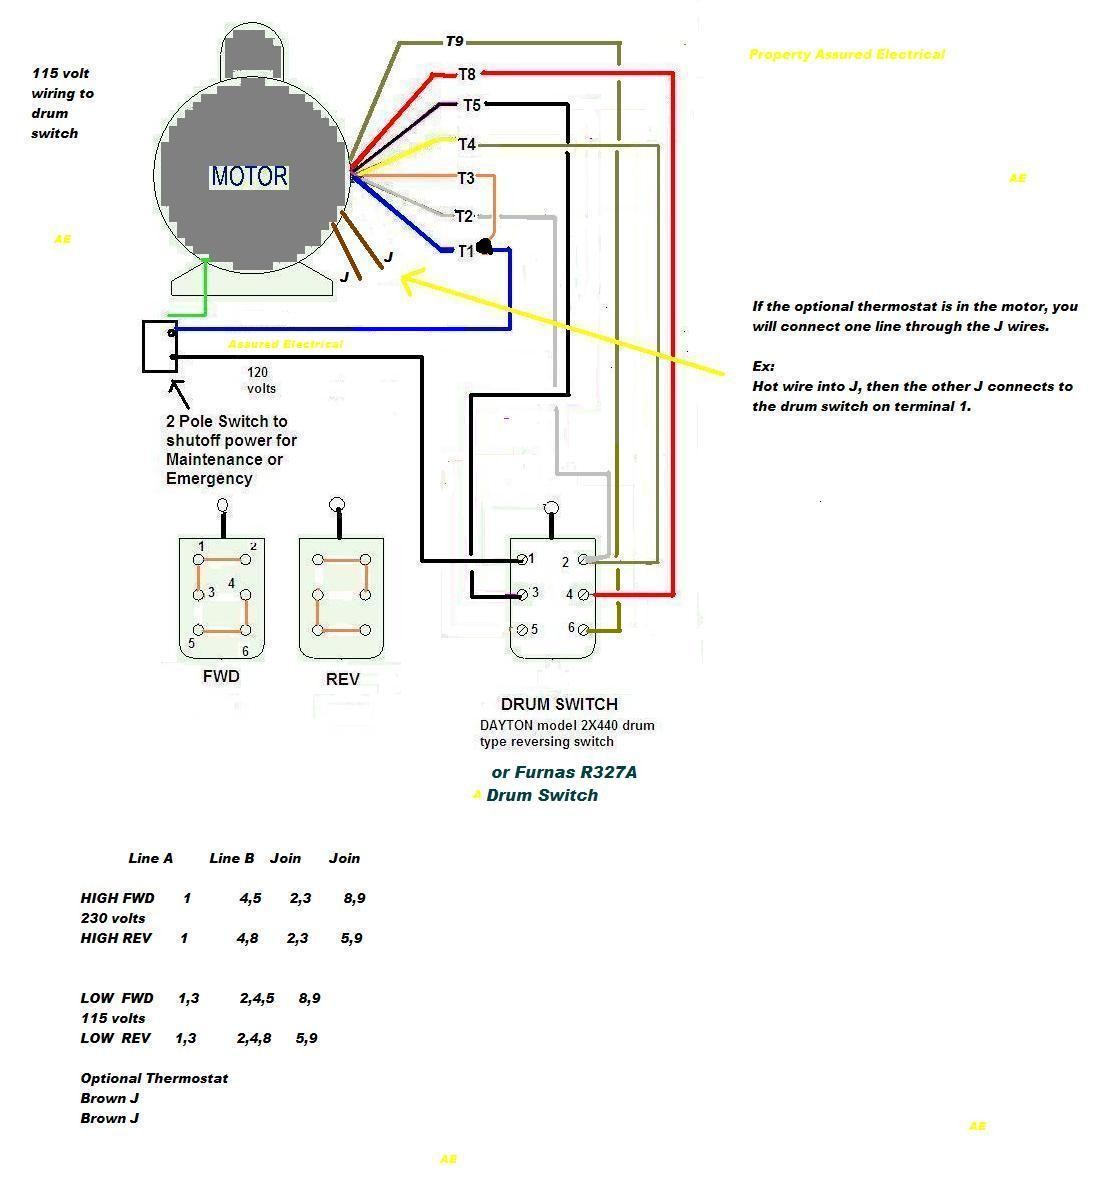 Ceiling Fan Motor Wiring Diagram from mainetreasurechest.com